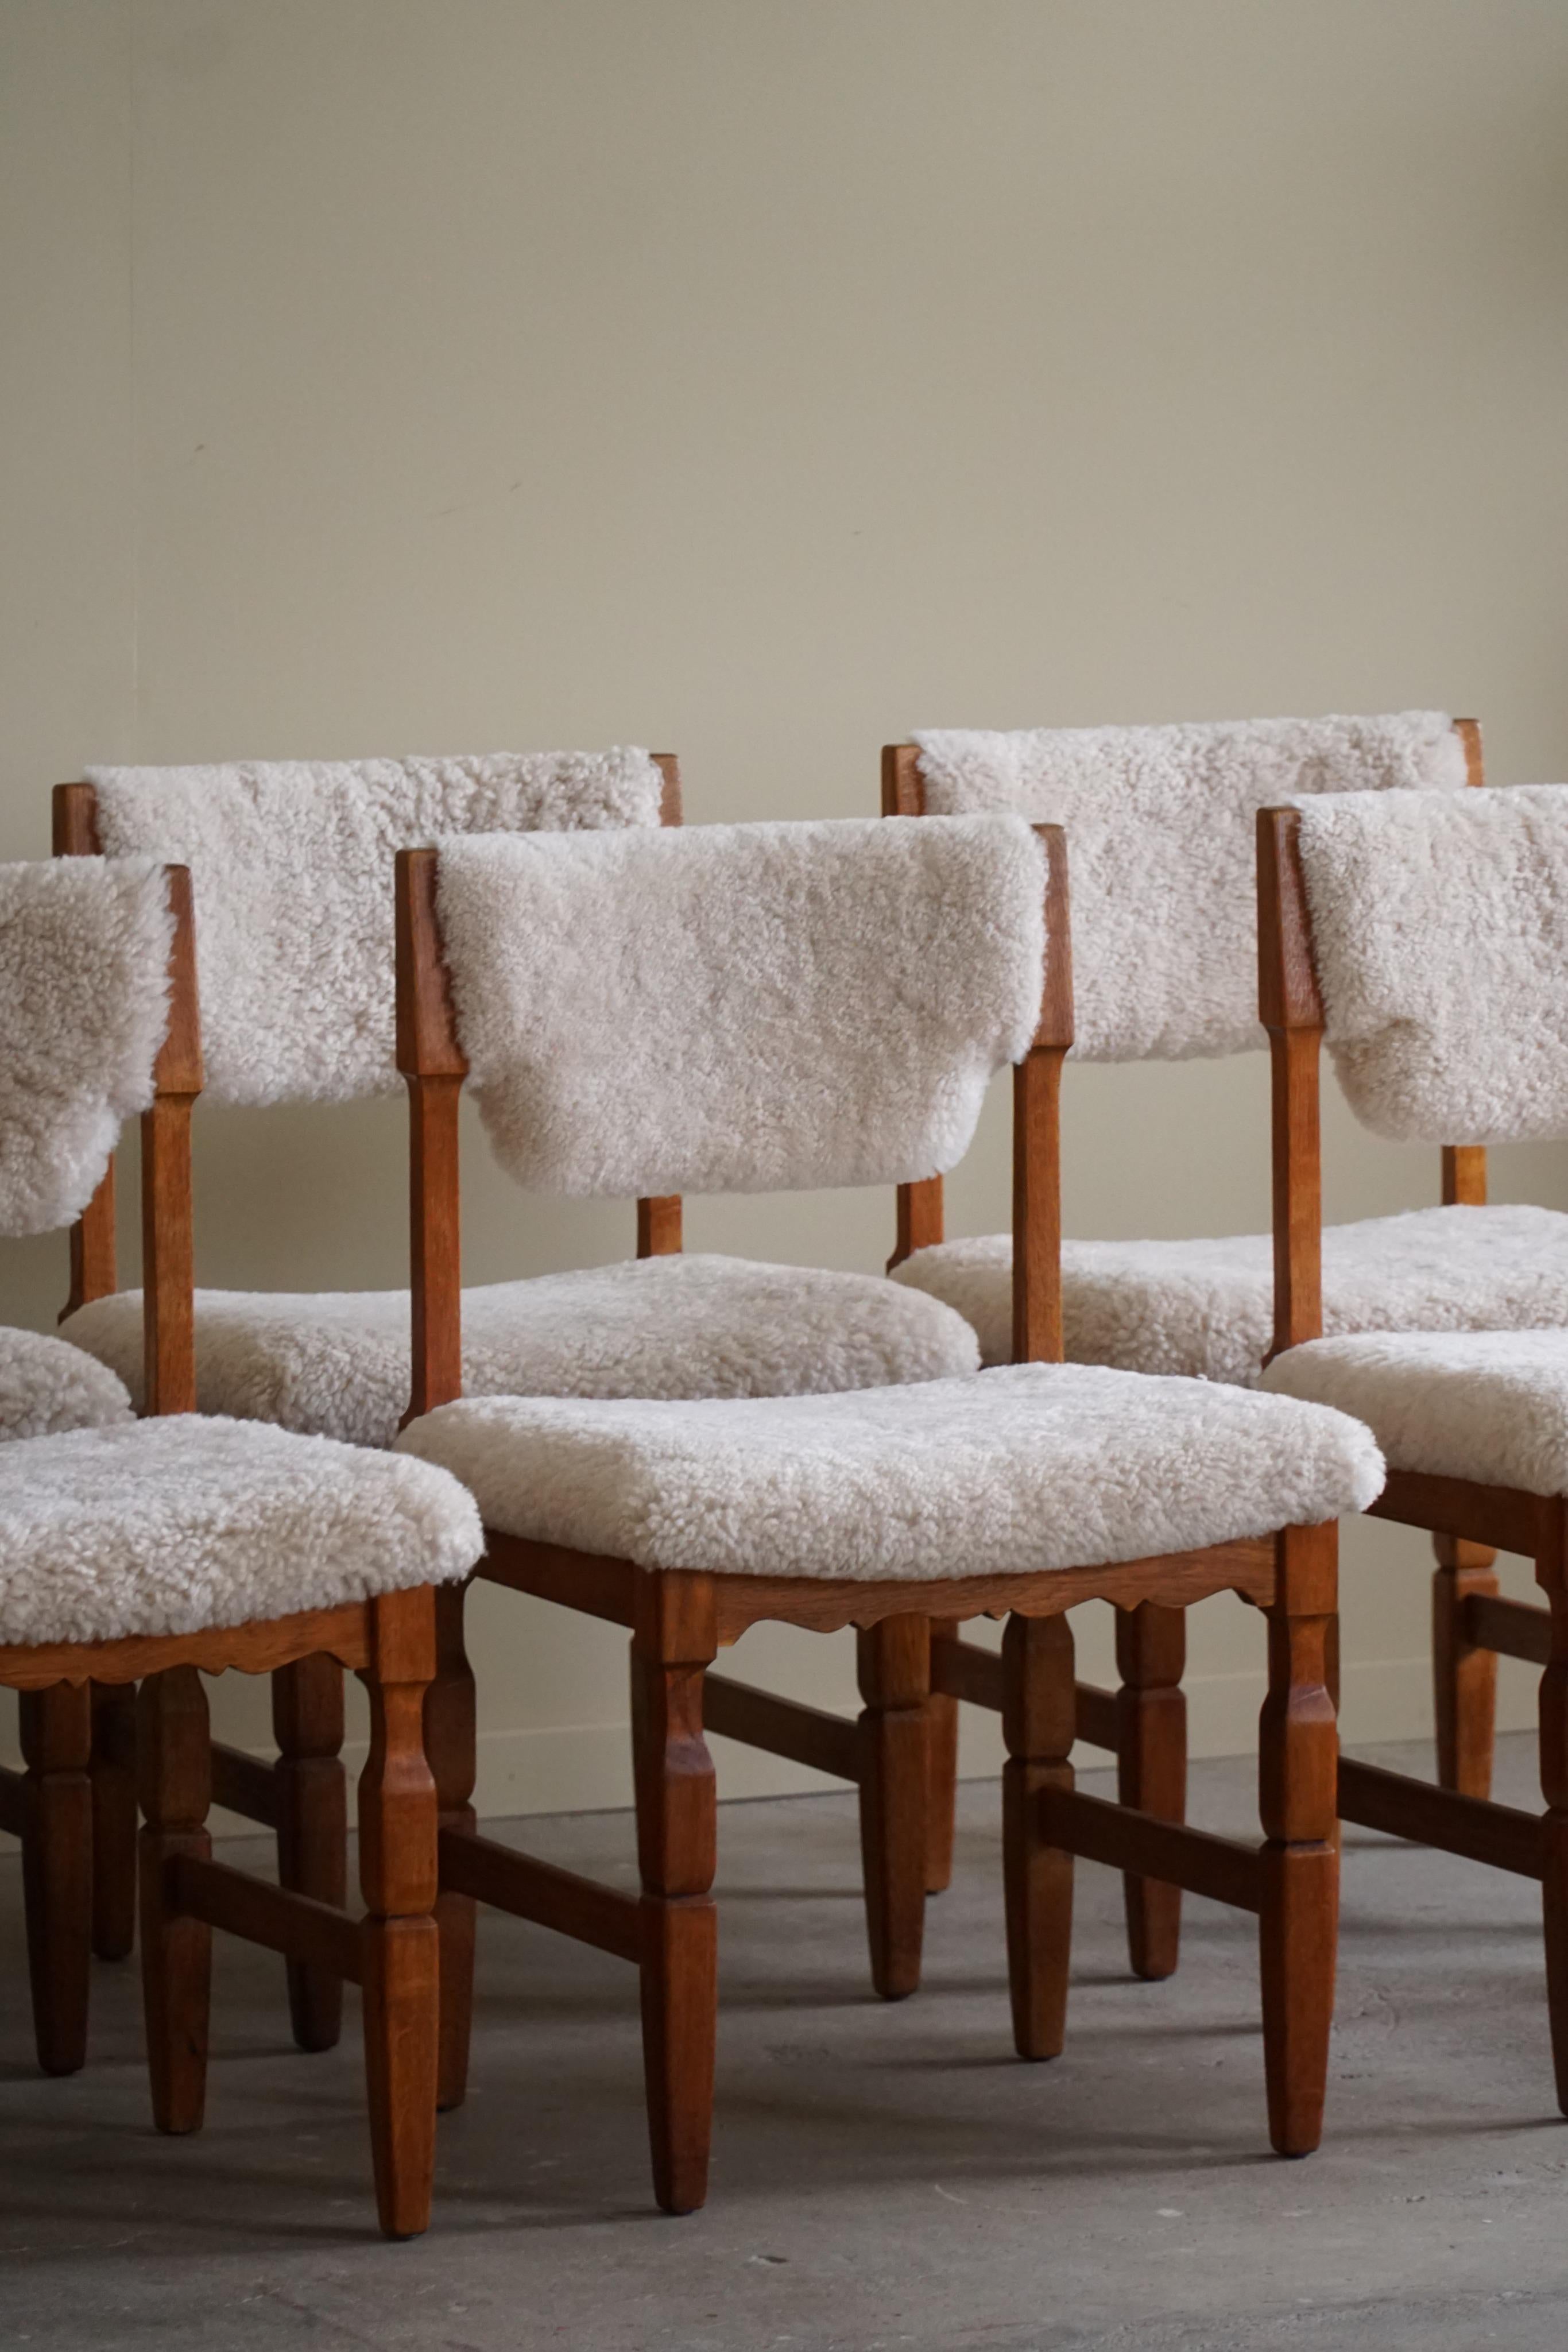 Mid-Century Modern Set of 6 Dining Chairs in Oak & Lambswool, Danish Mid Century Modern, 1960s For Sale